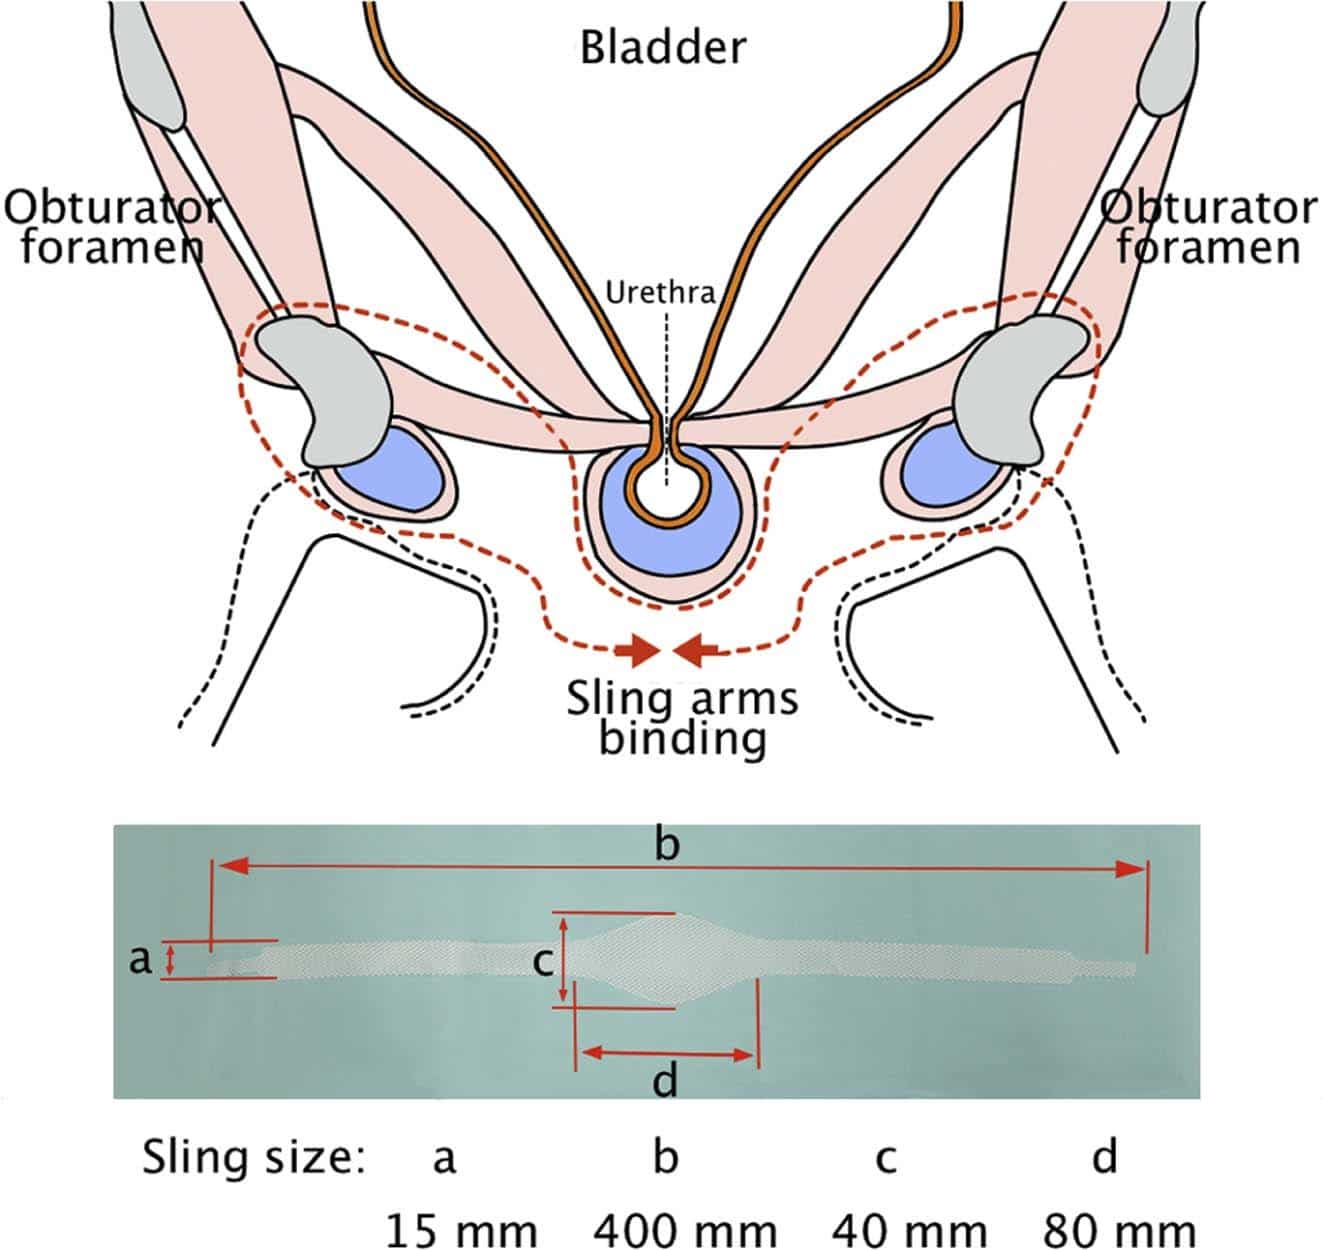 Titanized Transobturator Sling Placement for Male Stress Urinary ...